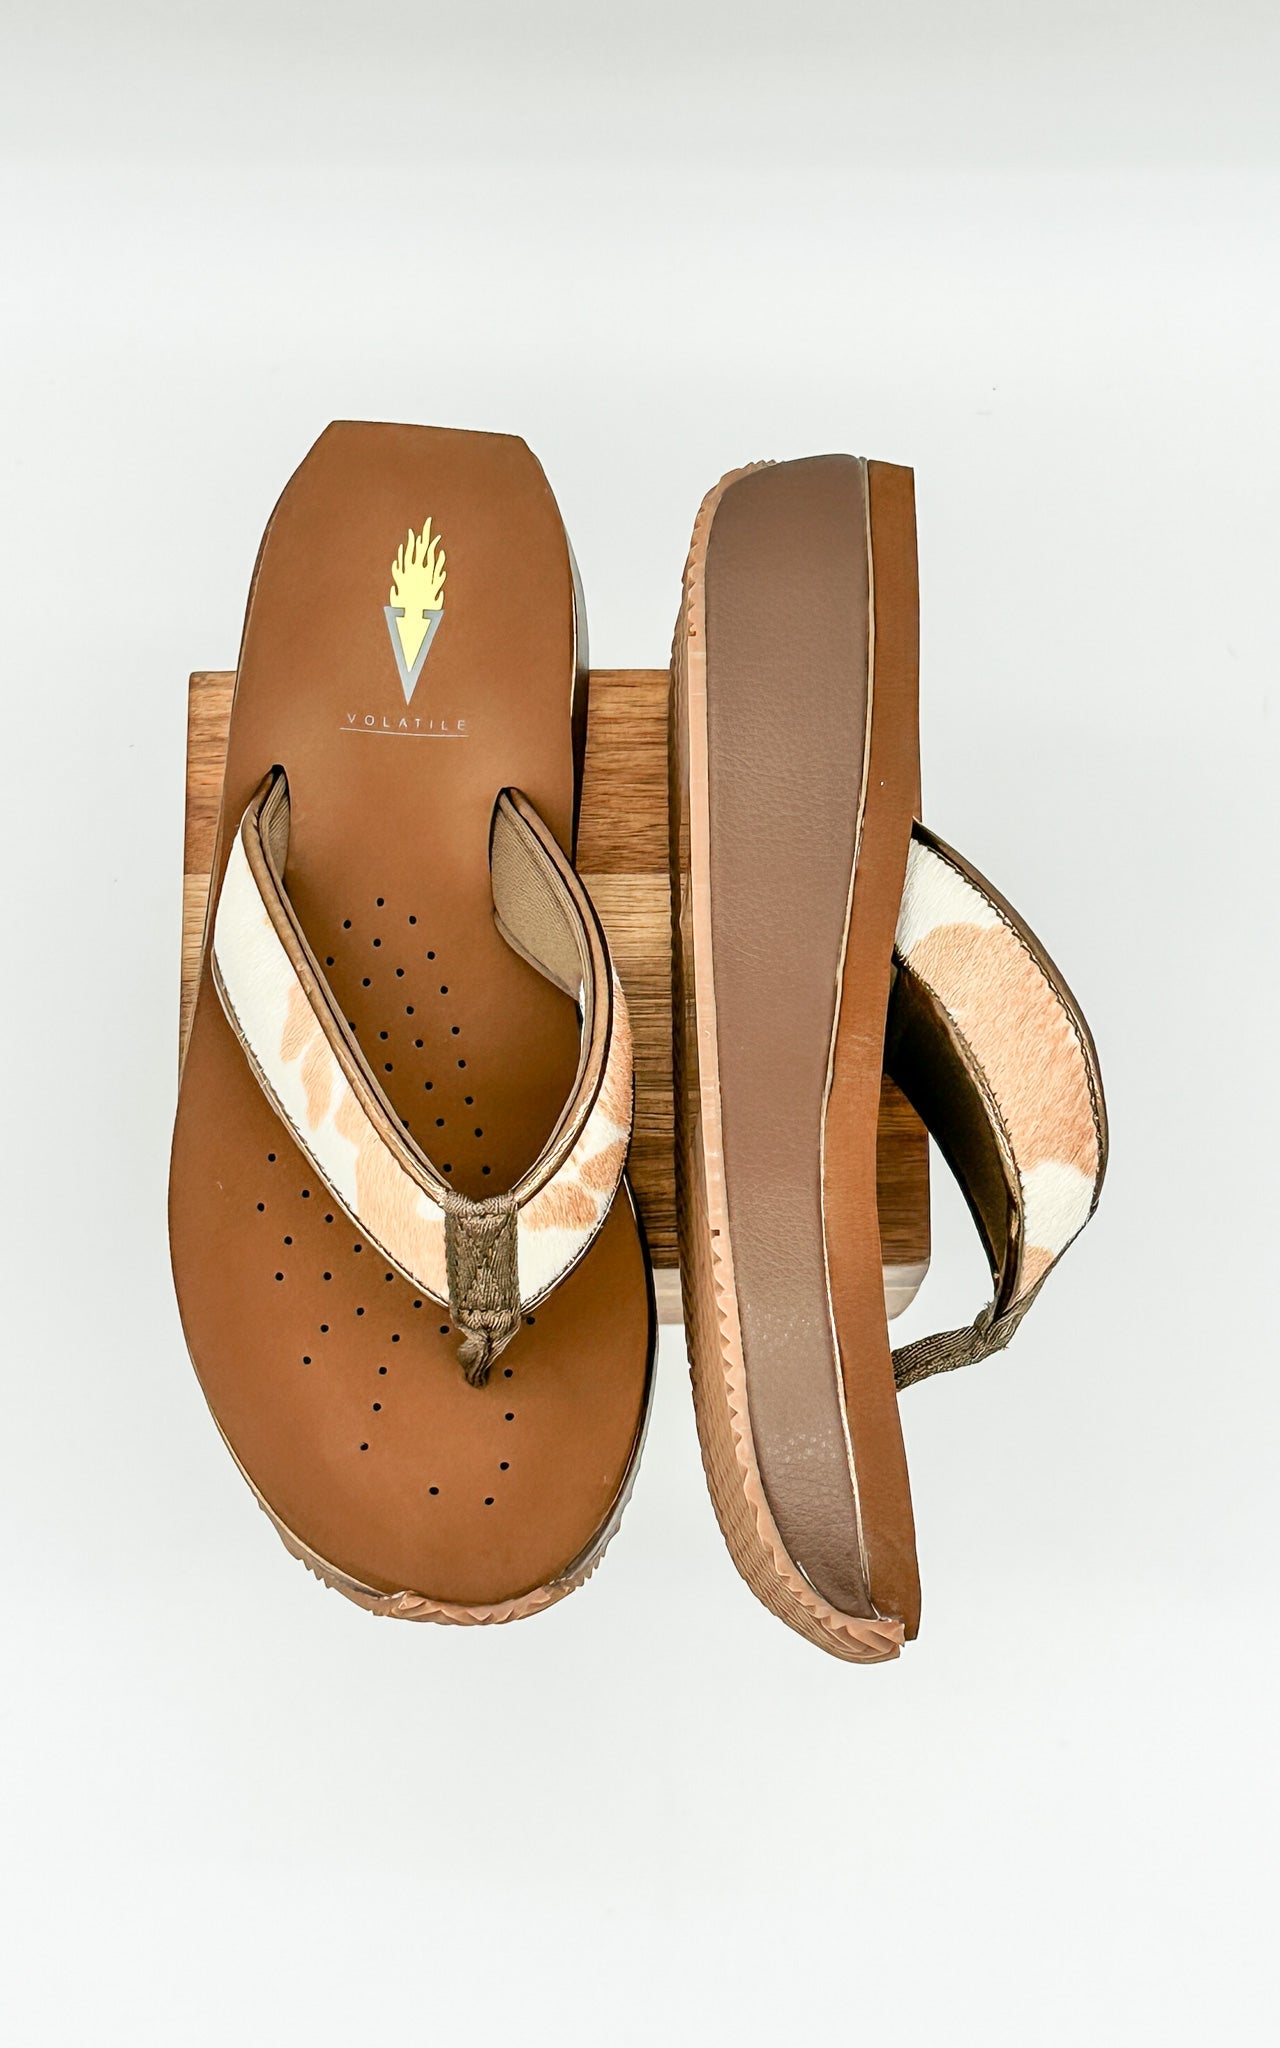 Volatile Neville Sandals in Tan with White Cowhide Straps